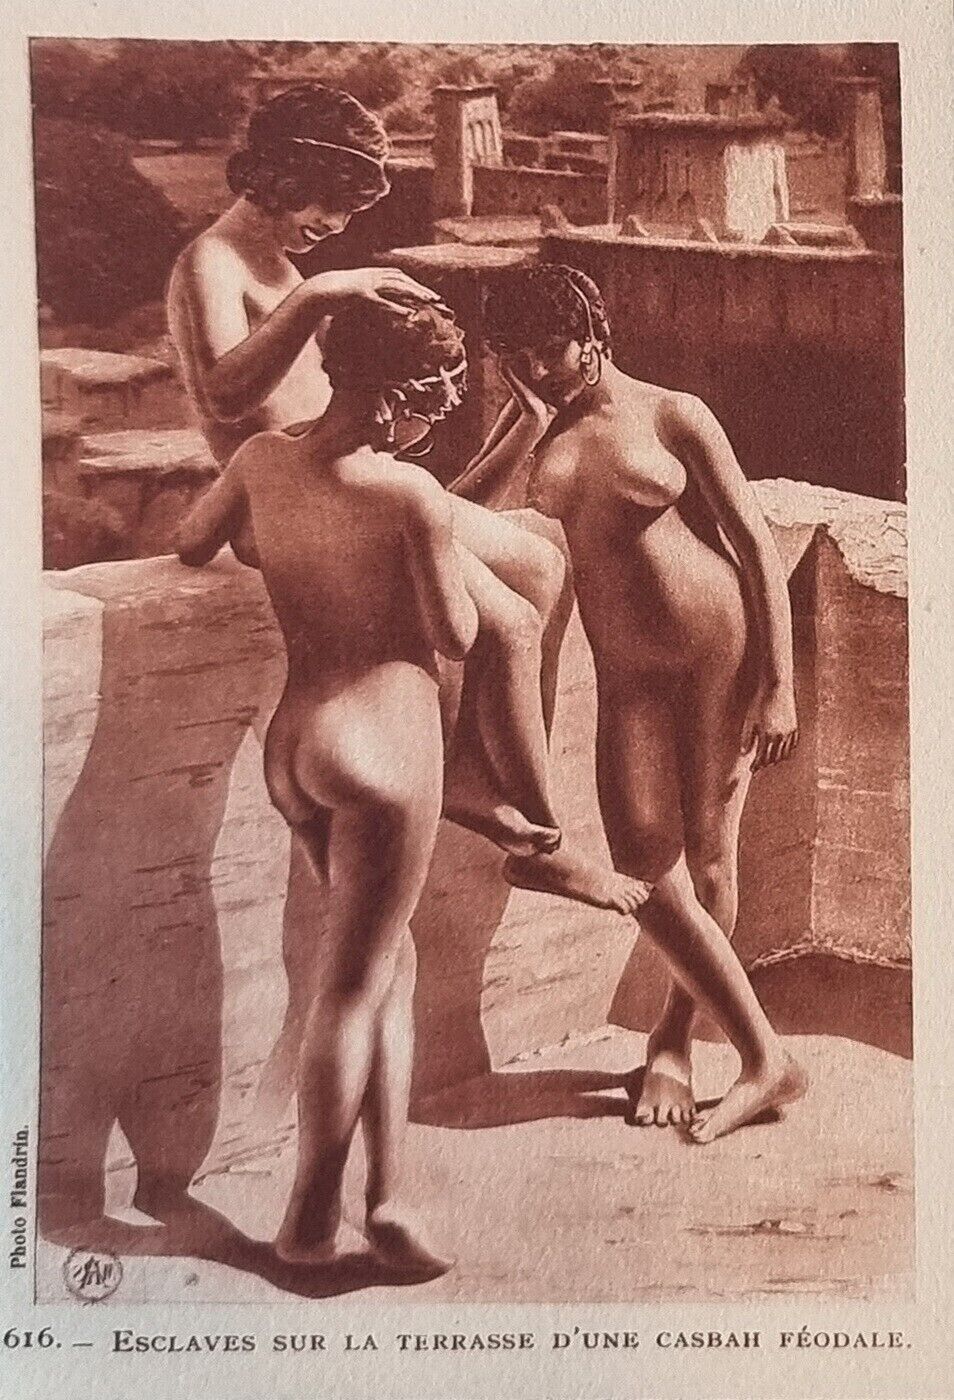 Risque North African Group Arab Nude Women Original Rare Real Photo 1910s